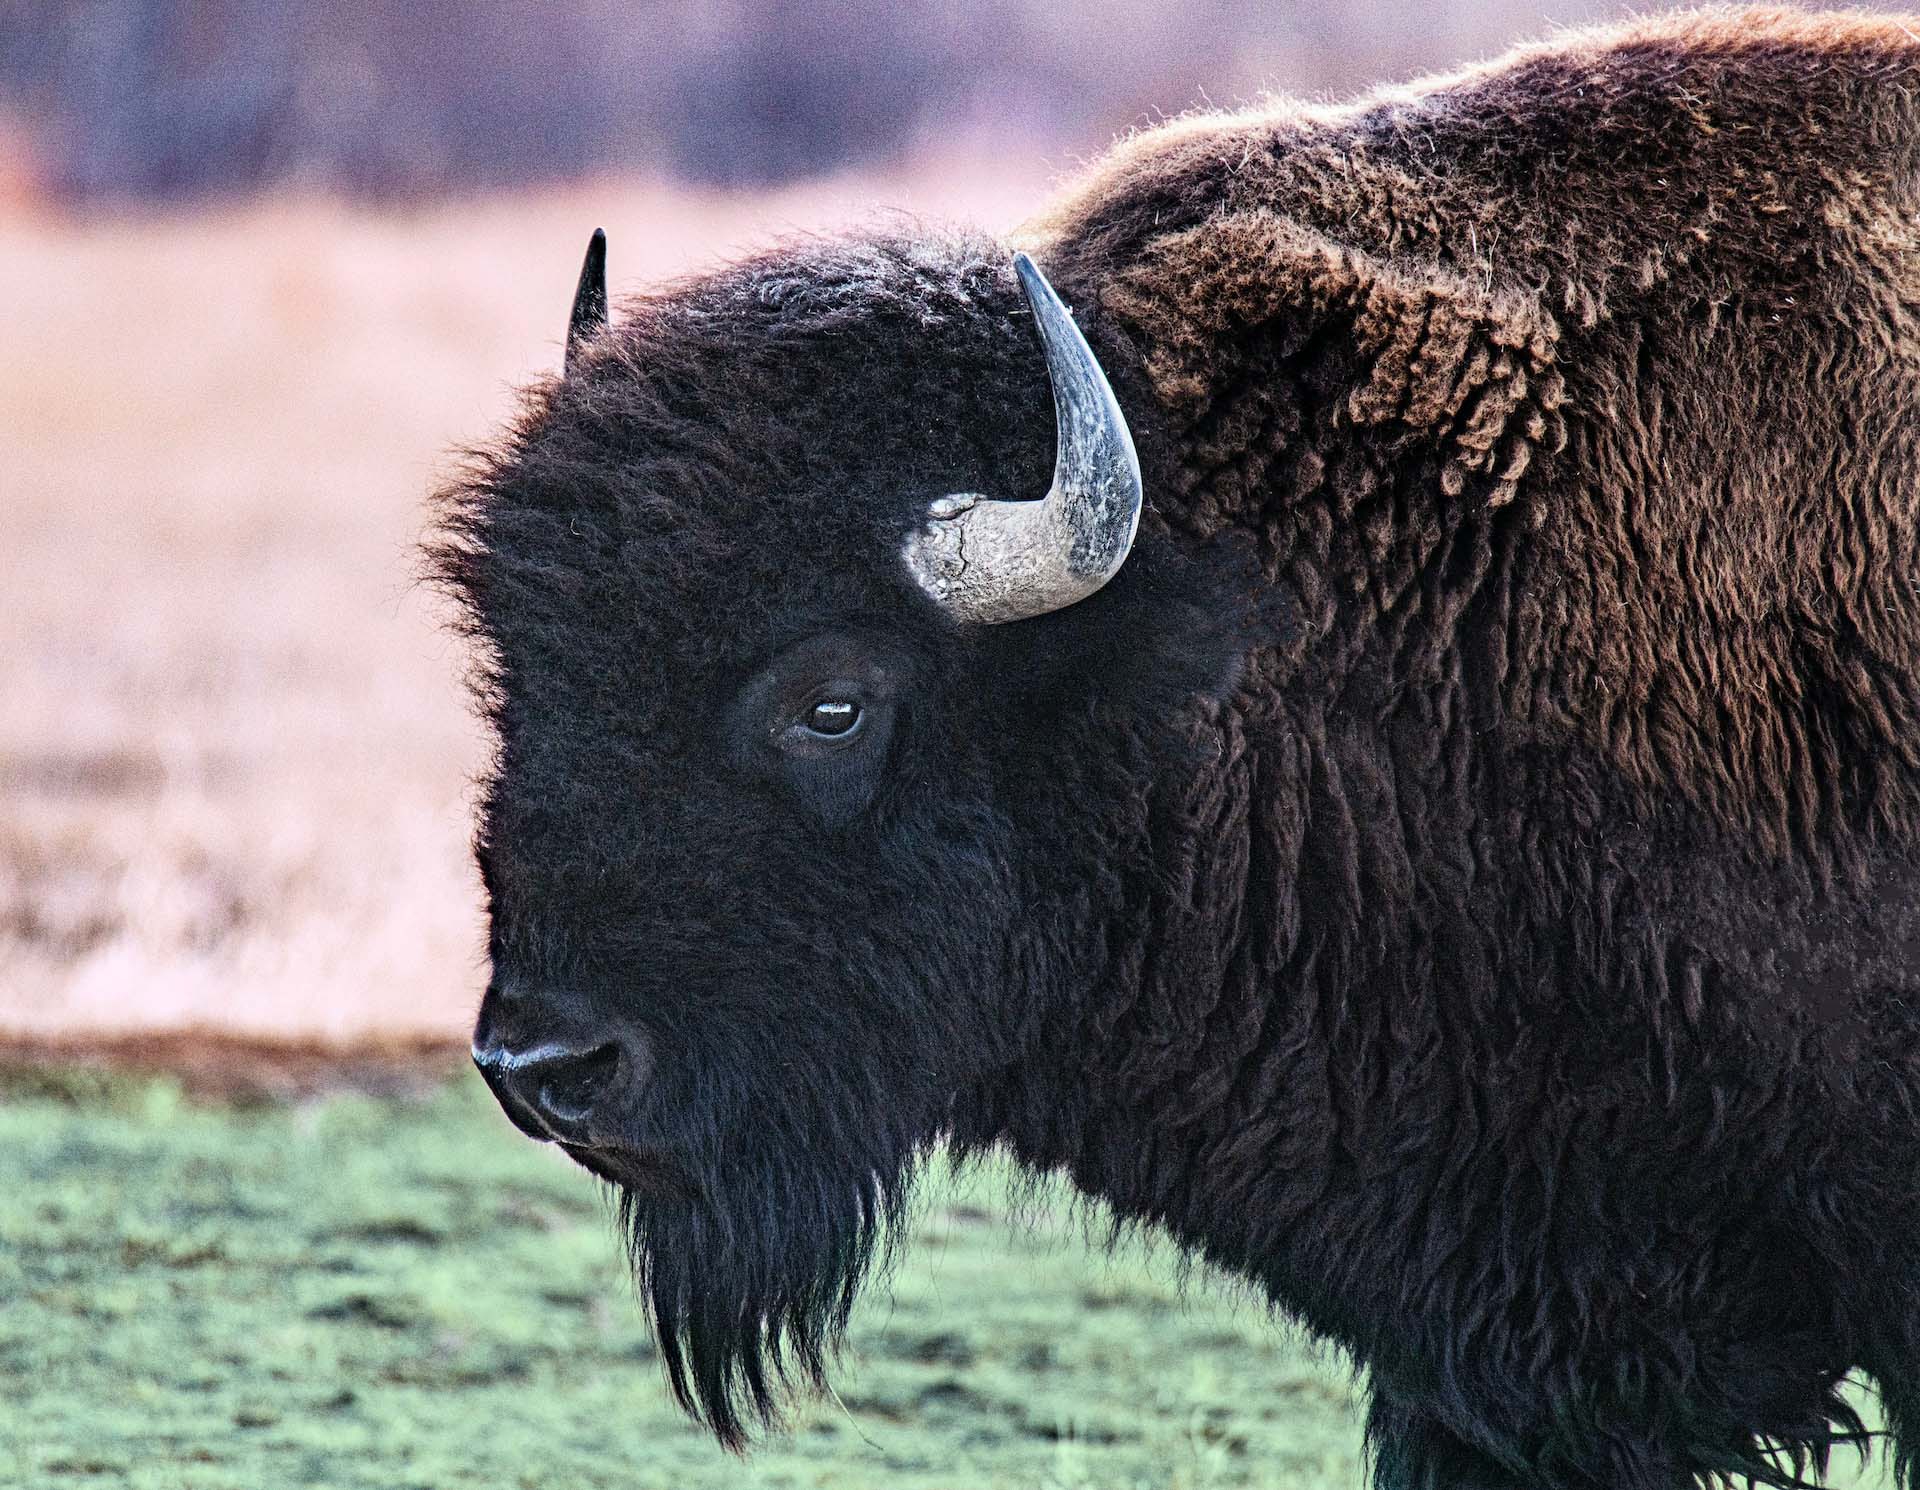 Why the Centre was named Bison